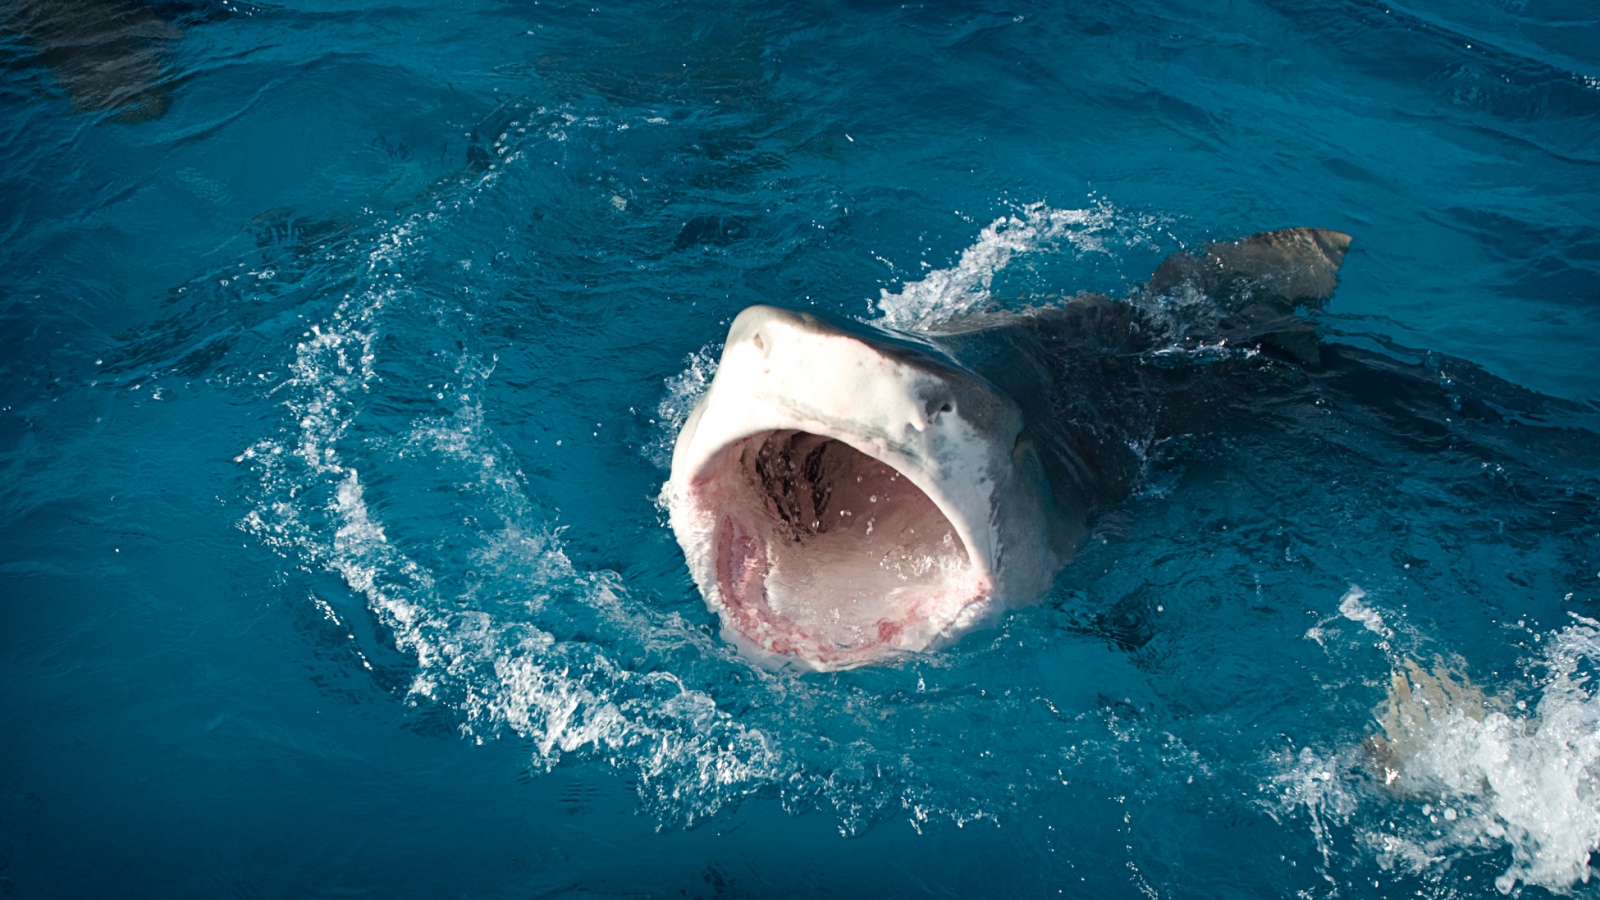 Tiger Shark with its mouth open on the surface